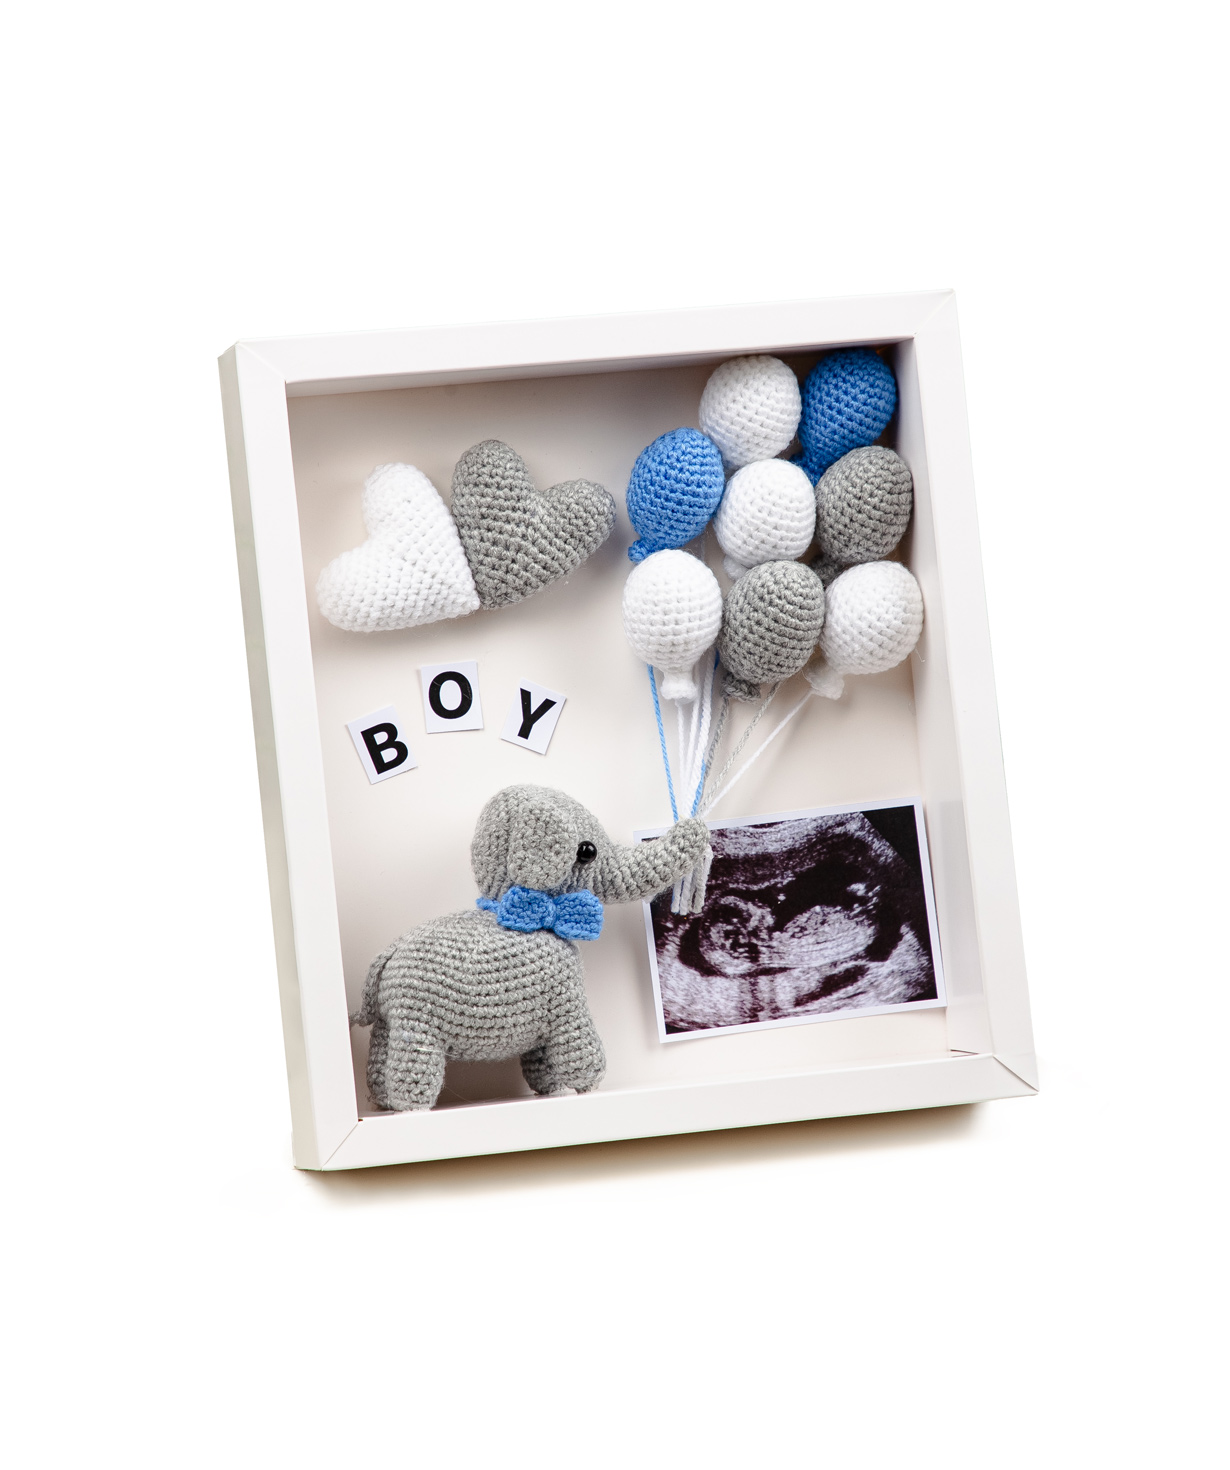 Gift box №169 to announce the gender of the baby: boy.